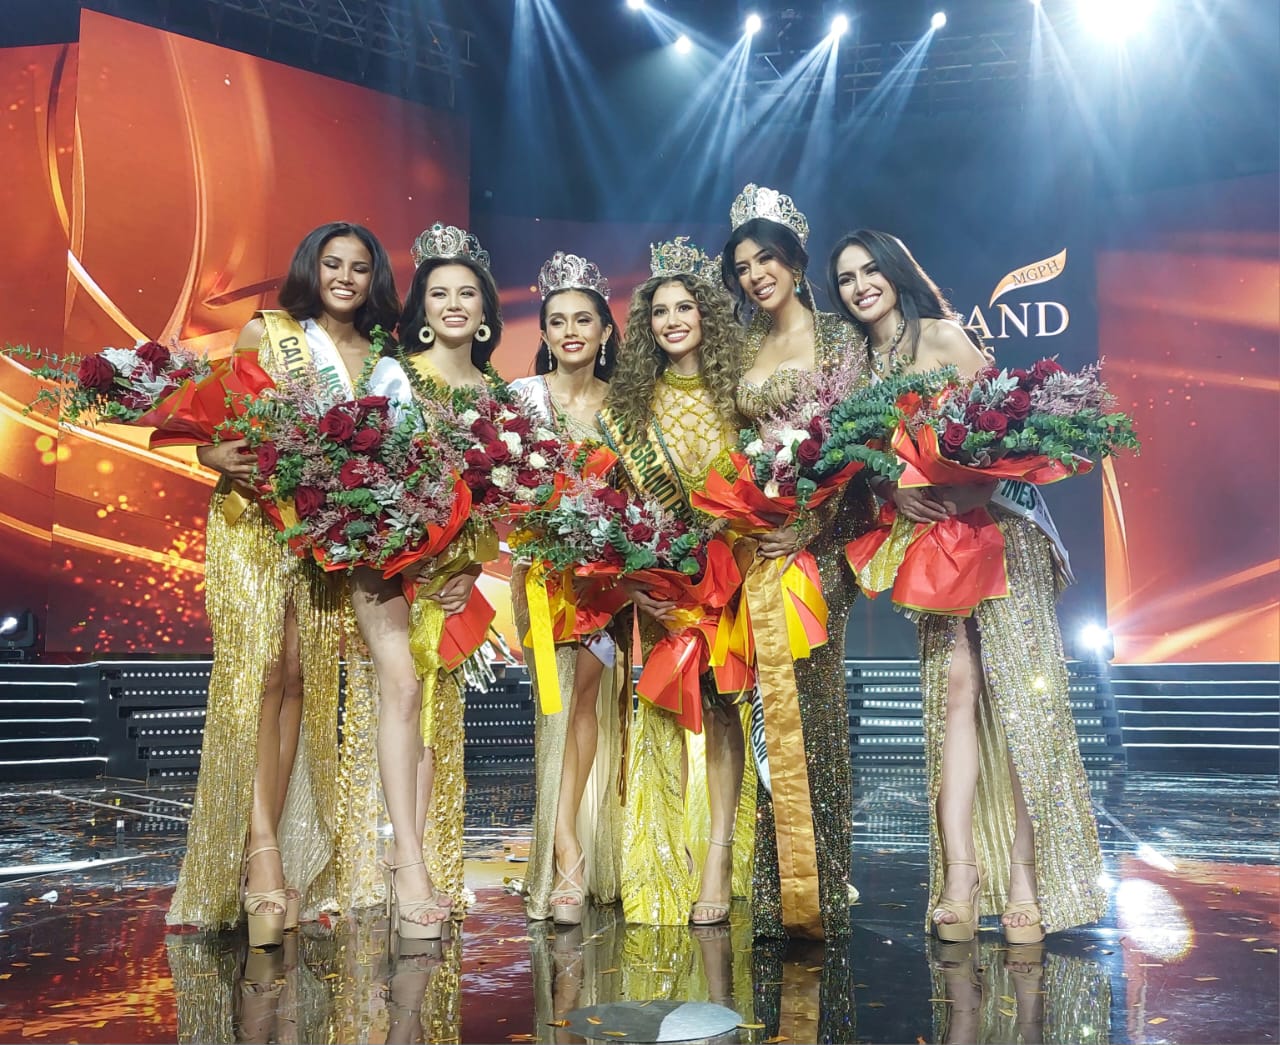 Miss Grand Philippines Nikki De Moura (third from right) is flanked by (from left) second runner-up Charie Manalo Sergio, Miss Eco Teen Philippines Francine Reyes, Reina Hispanoamericana Filipinas Michelle Arceo, Miss Philippines Tourism Herlene Budol, and first runner-up Shanon Tampon.